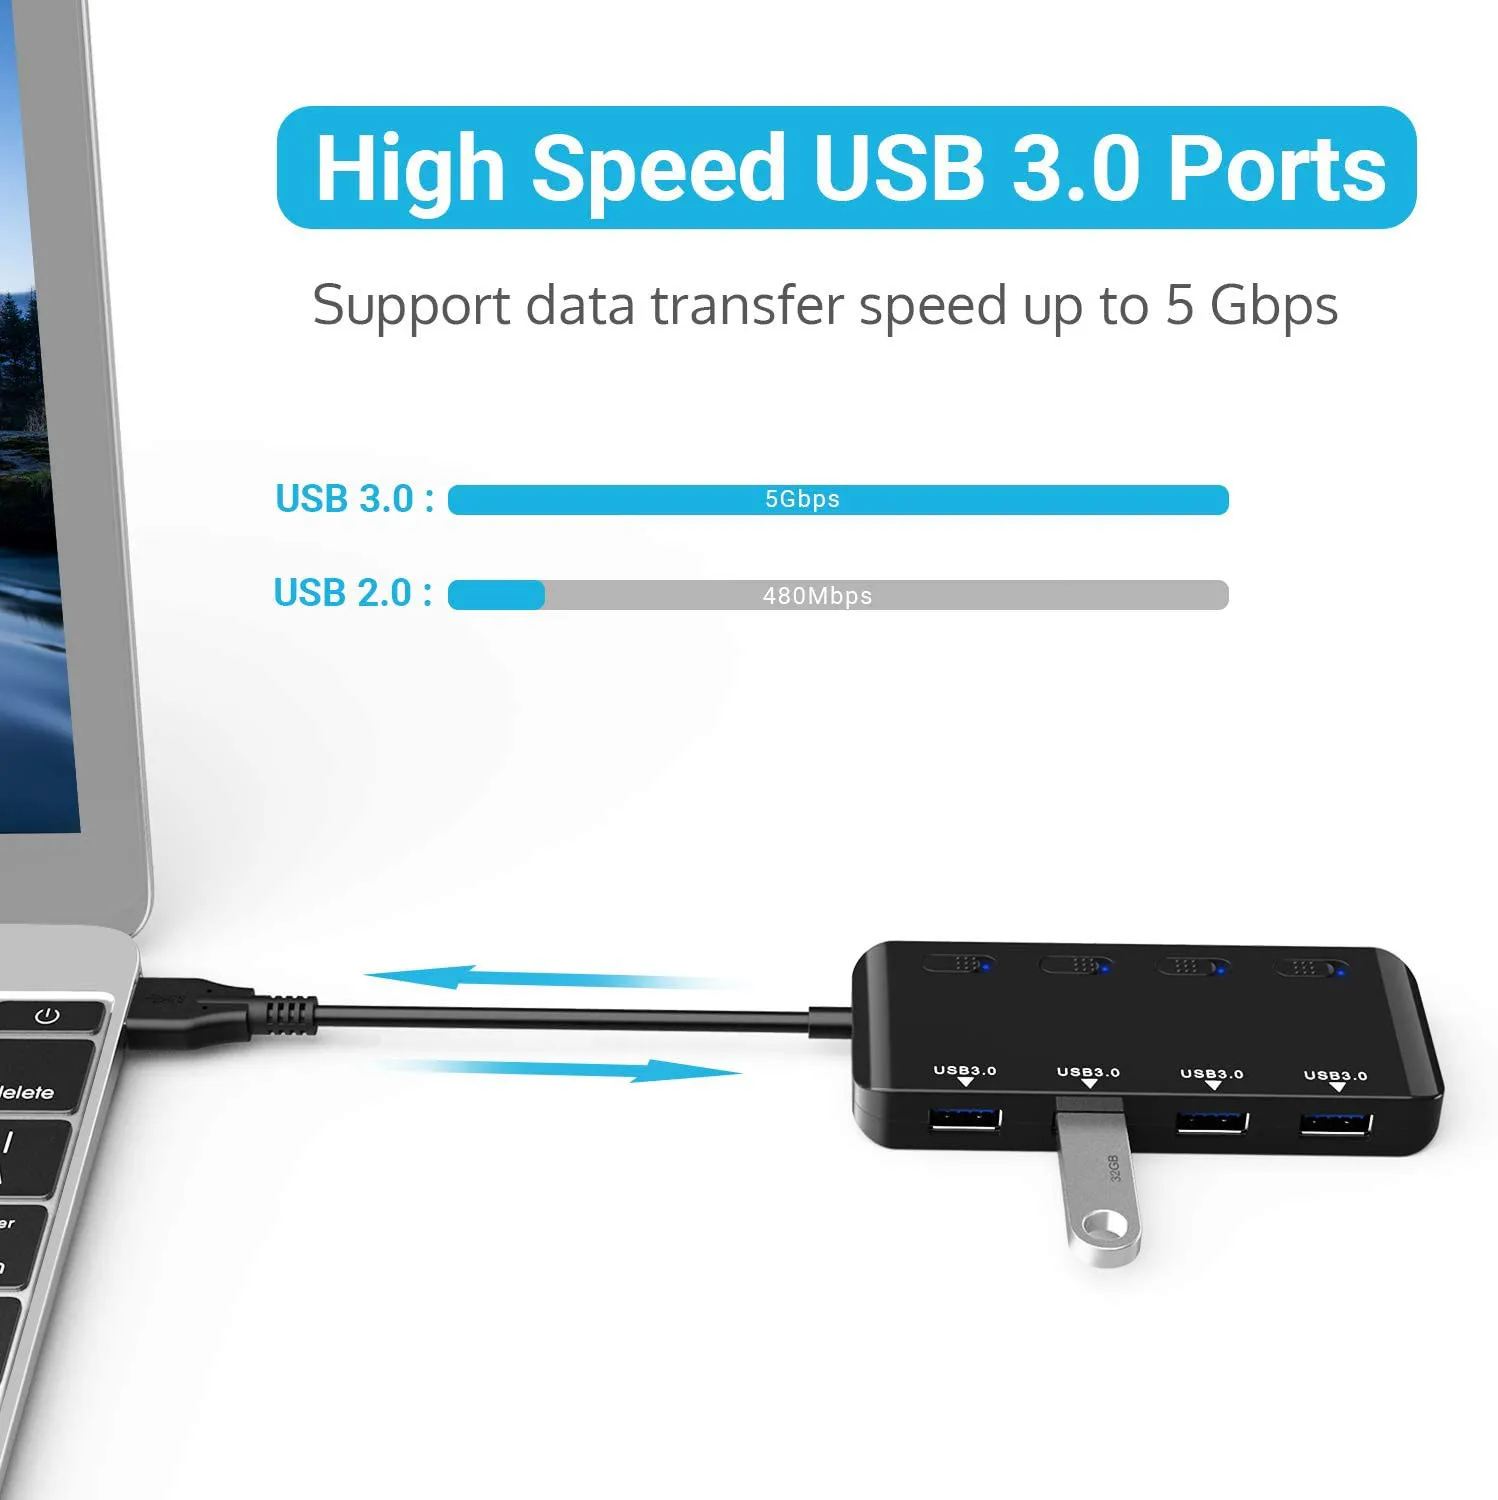 USB C Hub 4-Port Extender USB 3.0 Splitter 5Gbps High-Speed USB Data Hub with Power Switches for Notebook Laptops PC Accessories enlarge